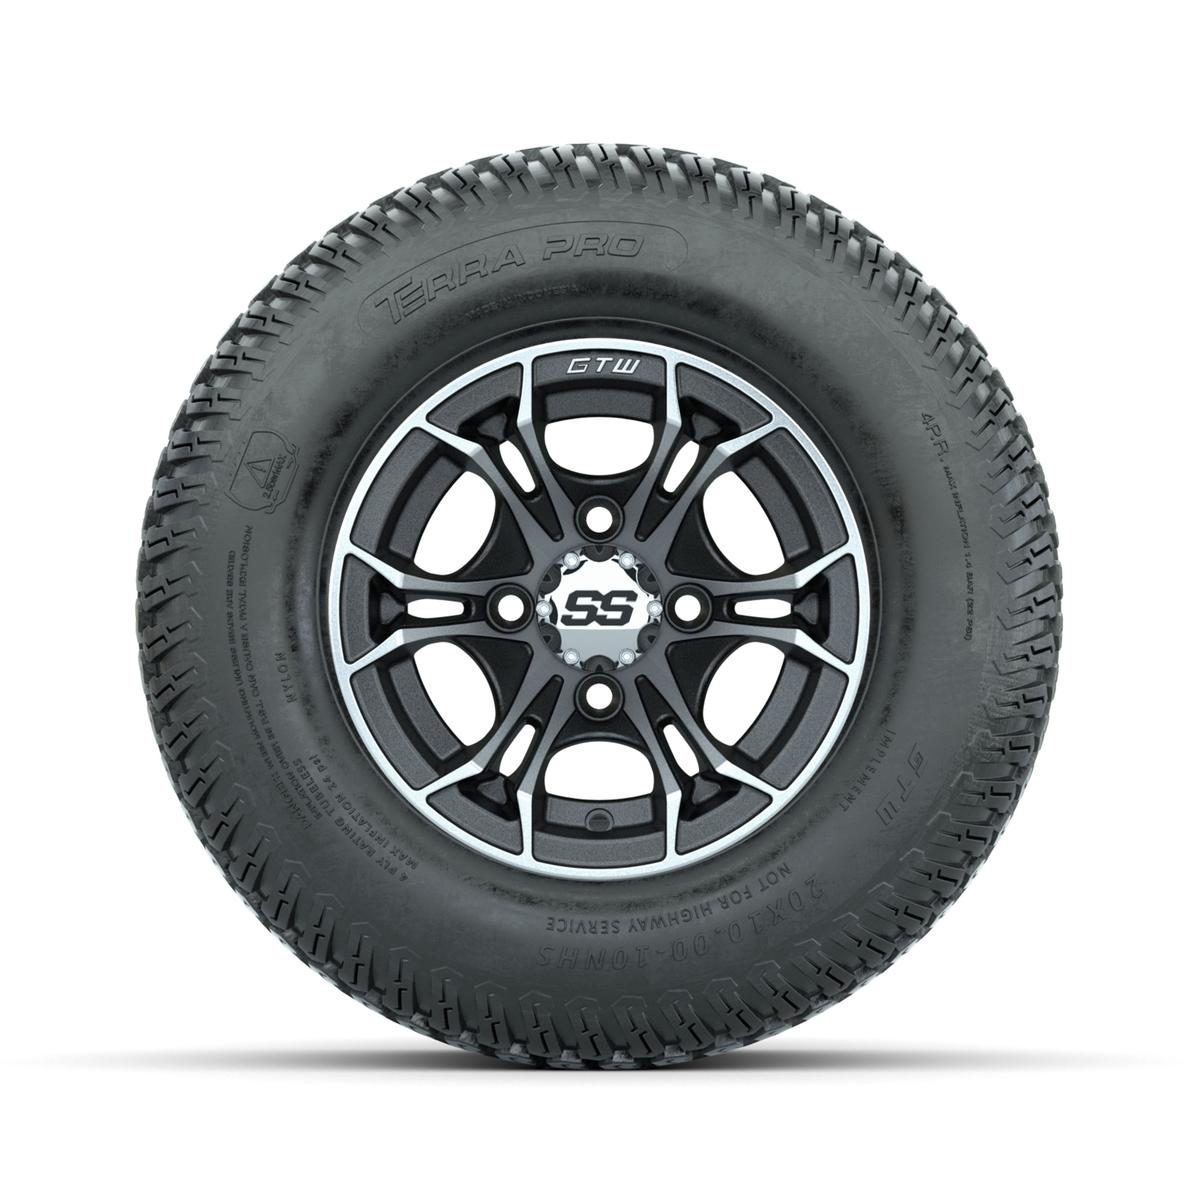 GTW Spyder Machined/Matte Grey 10 in Wheels with 20x10-10 Terra Pro S-Tread Traction Tires – Full Set